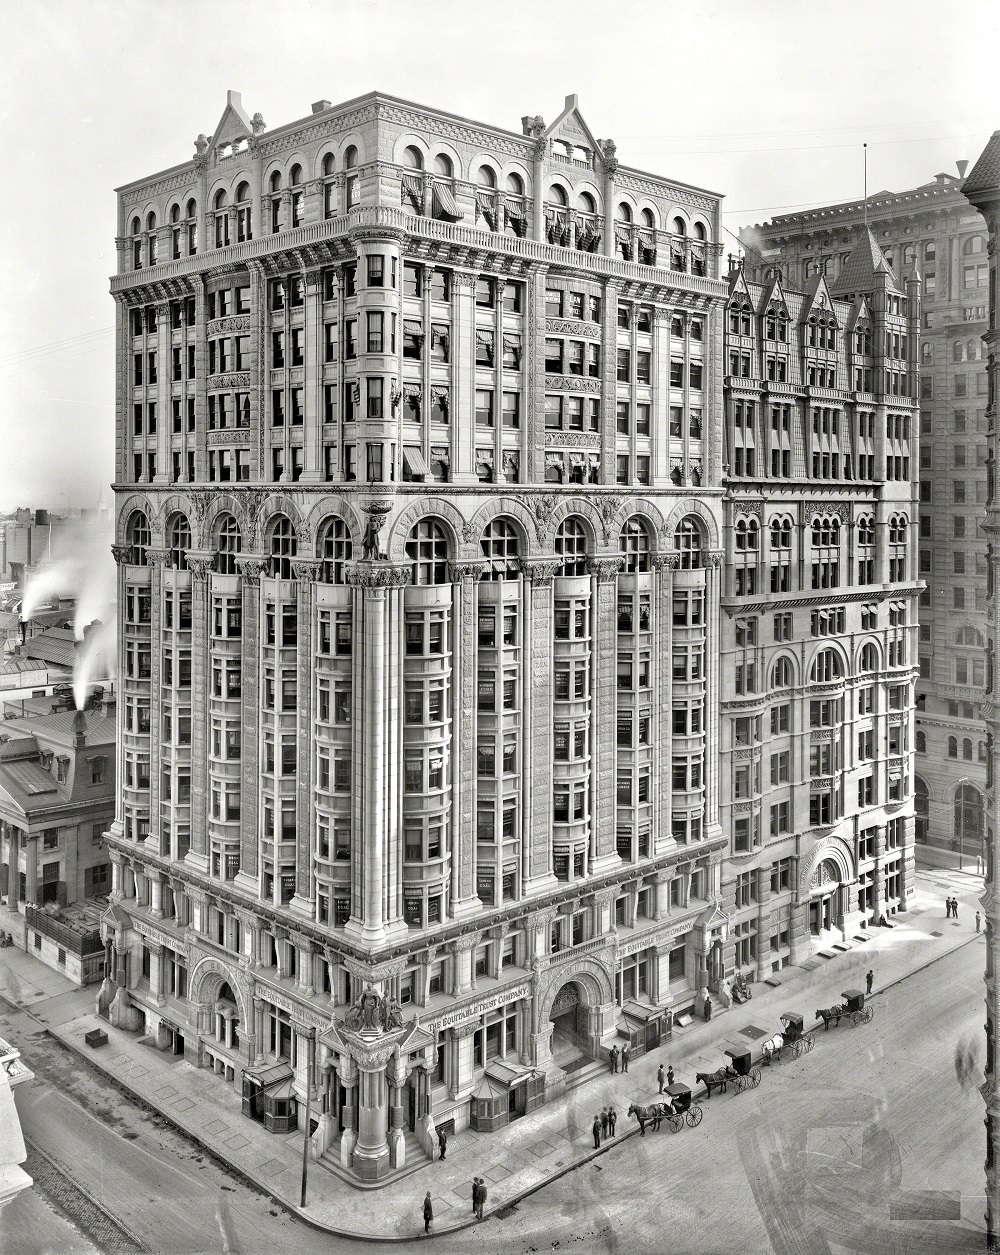 Betz Building, Broad and South Penn Square, Philadelphia, 1900